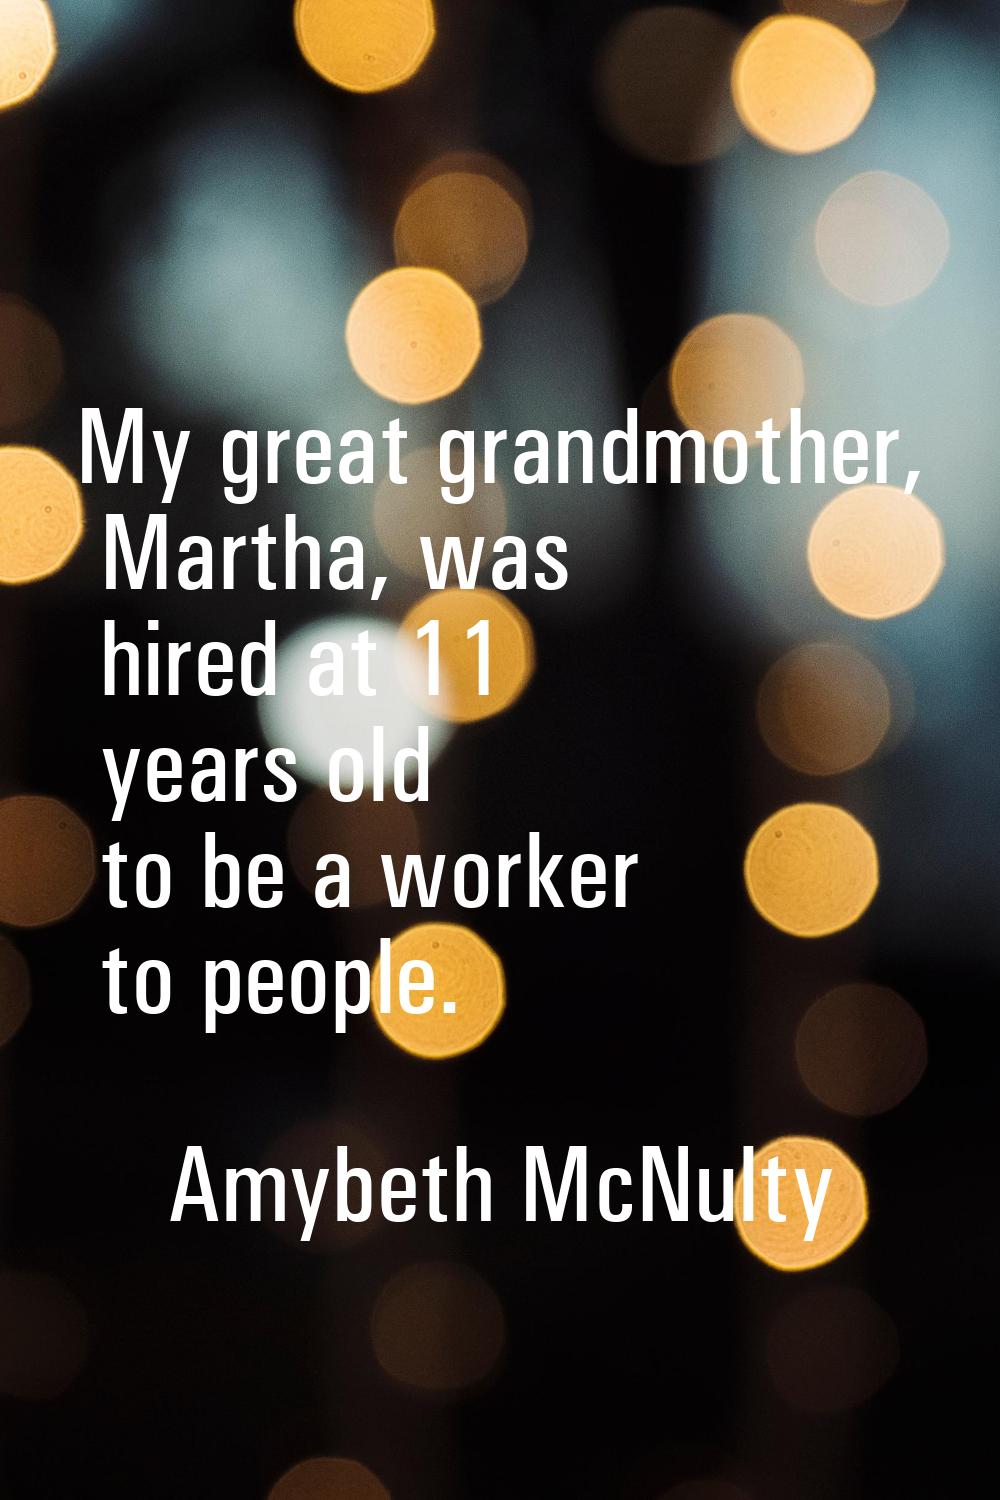 My great grandmother, Martha, was hired at 11 years old to be a worker to people.